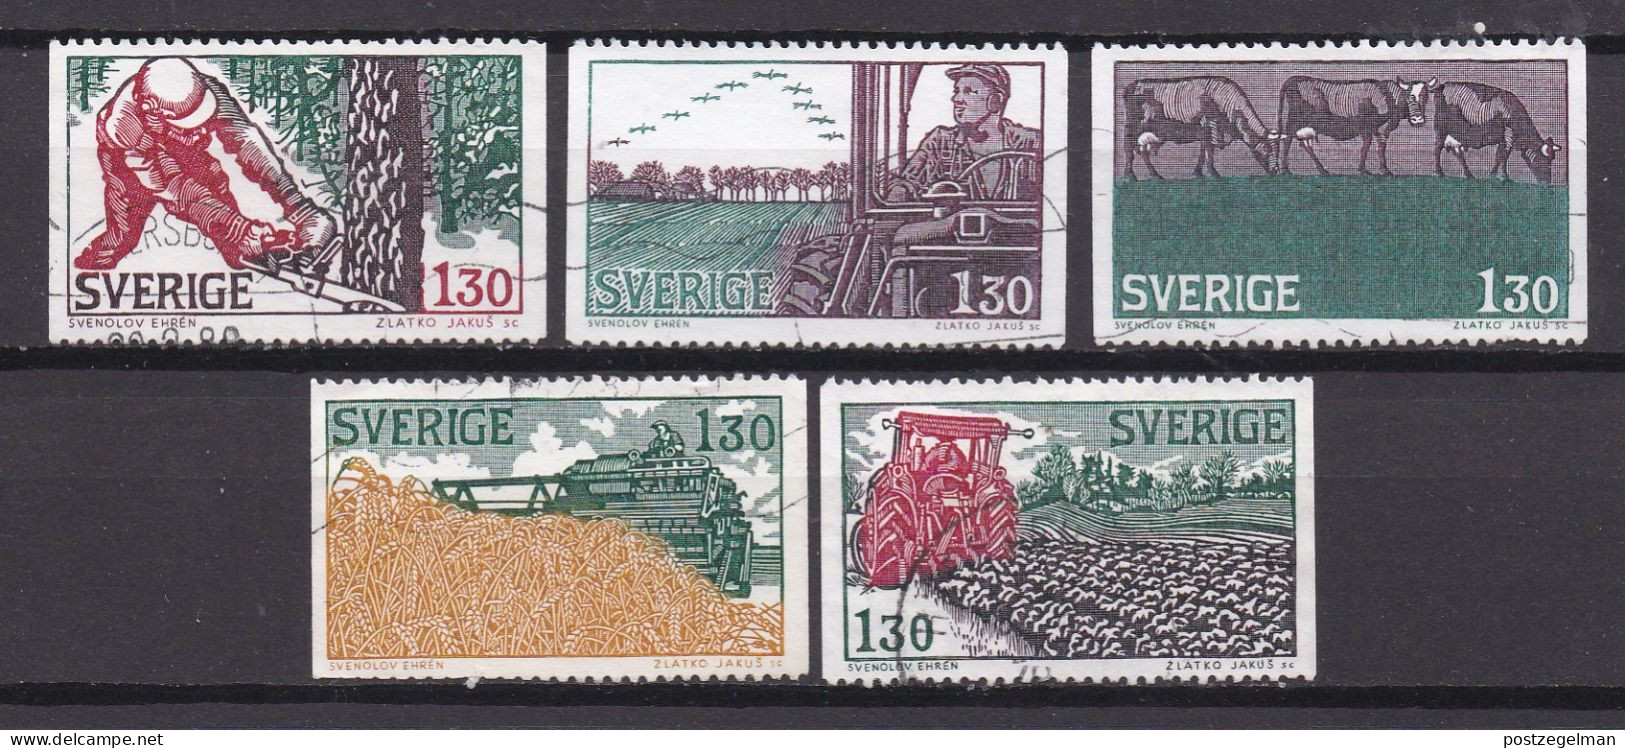 SWEDEN,1979, Used Stamp(s), Farming - Cattle , SG997-1001, Scan 20228, - Used Stamps